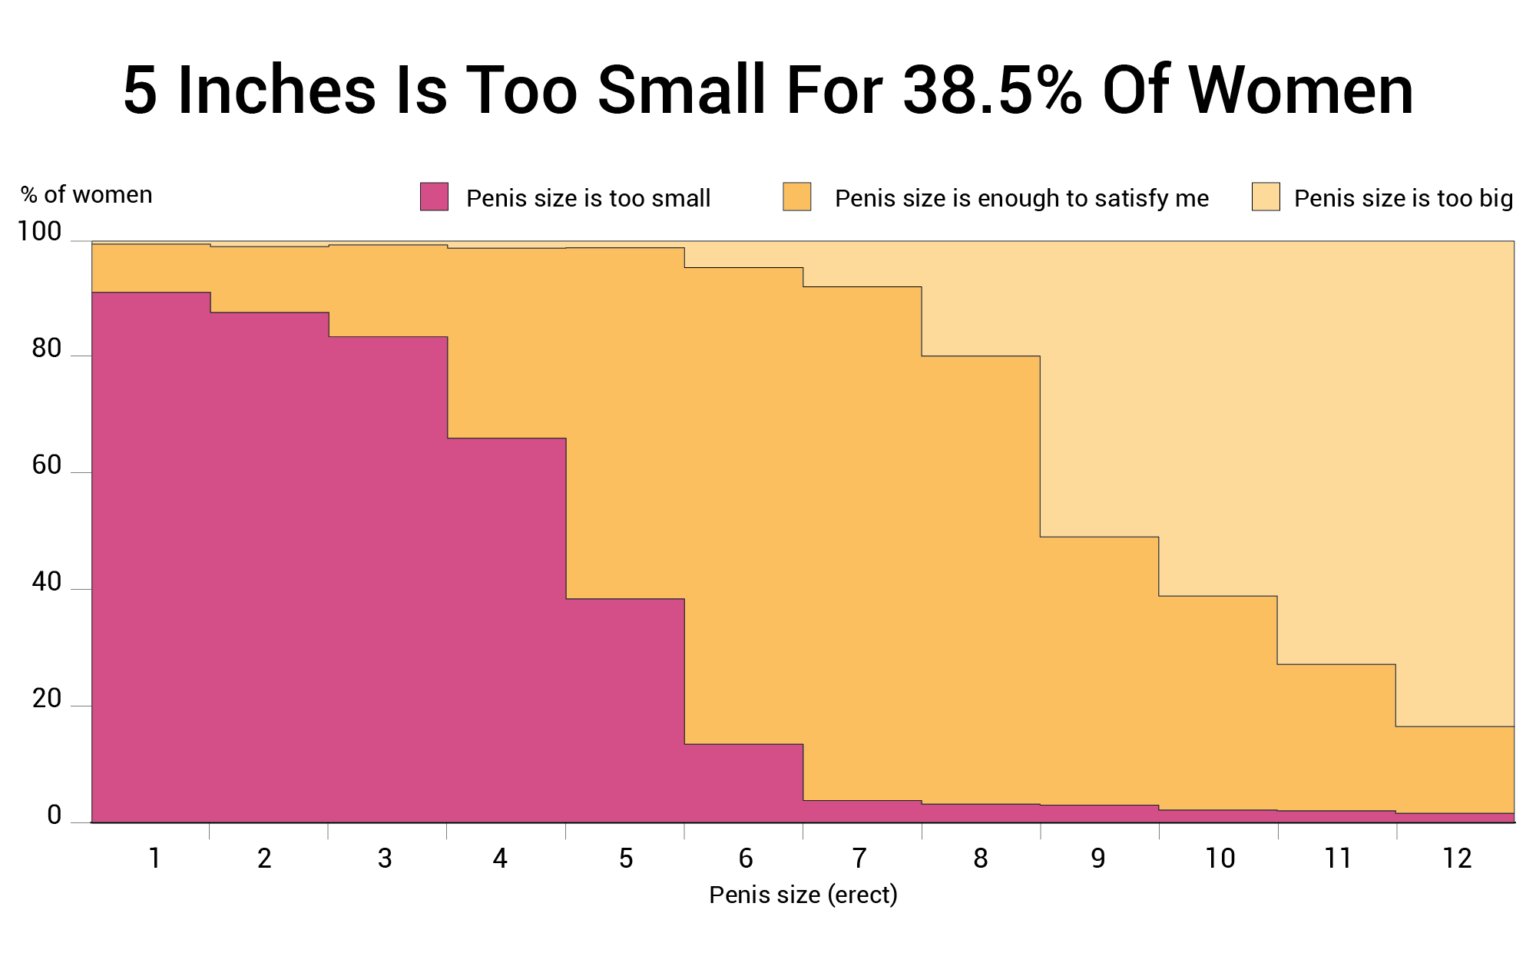 5-inches-is-too-small-for-38.5-percent-of-women-1536x976.png